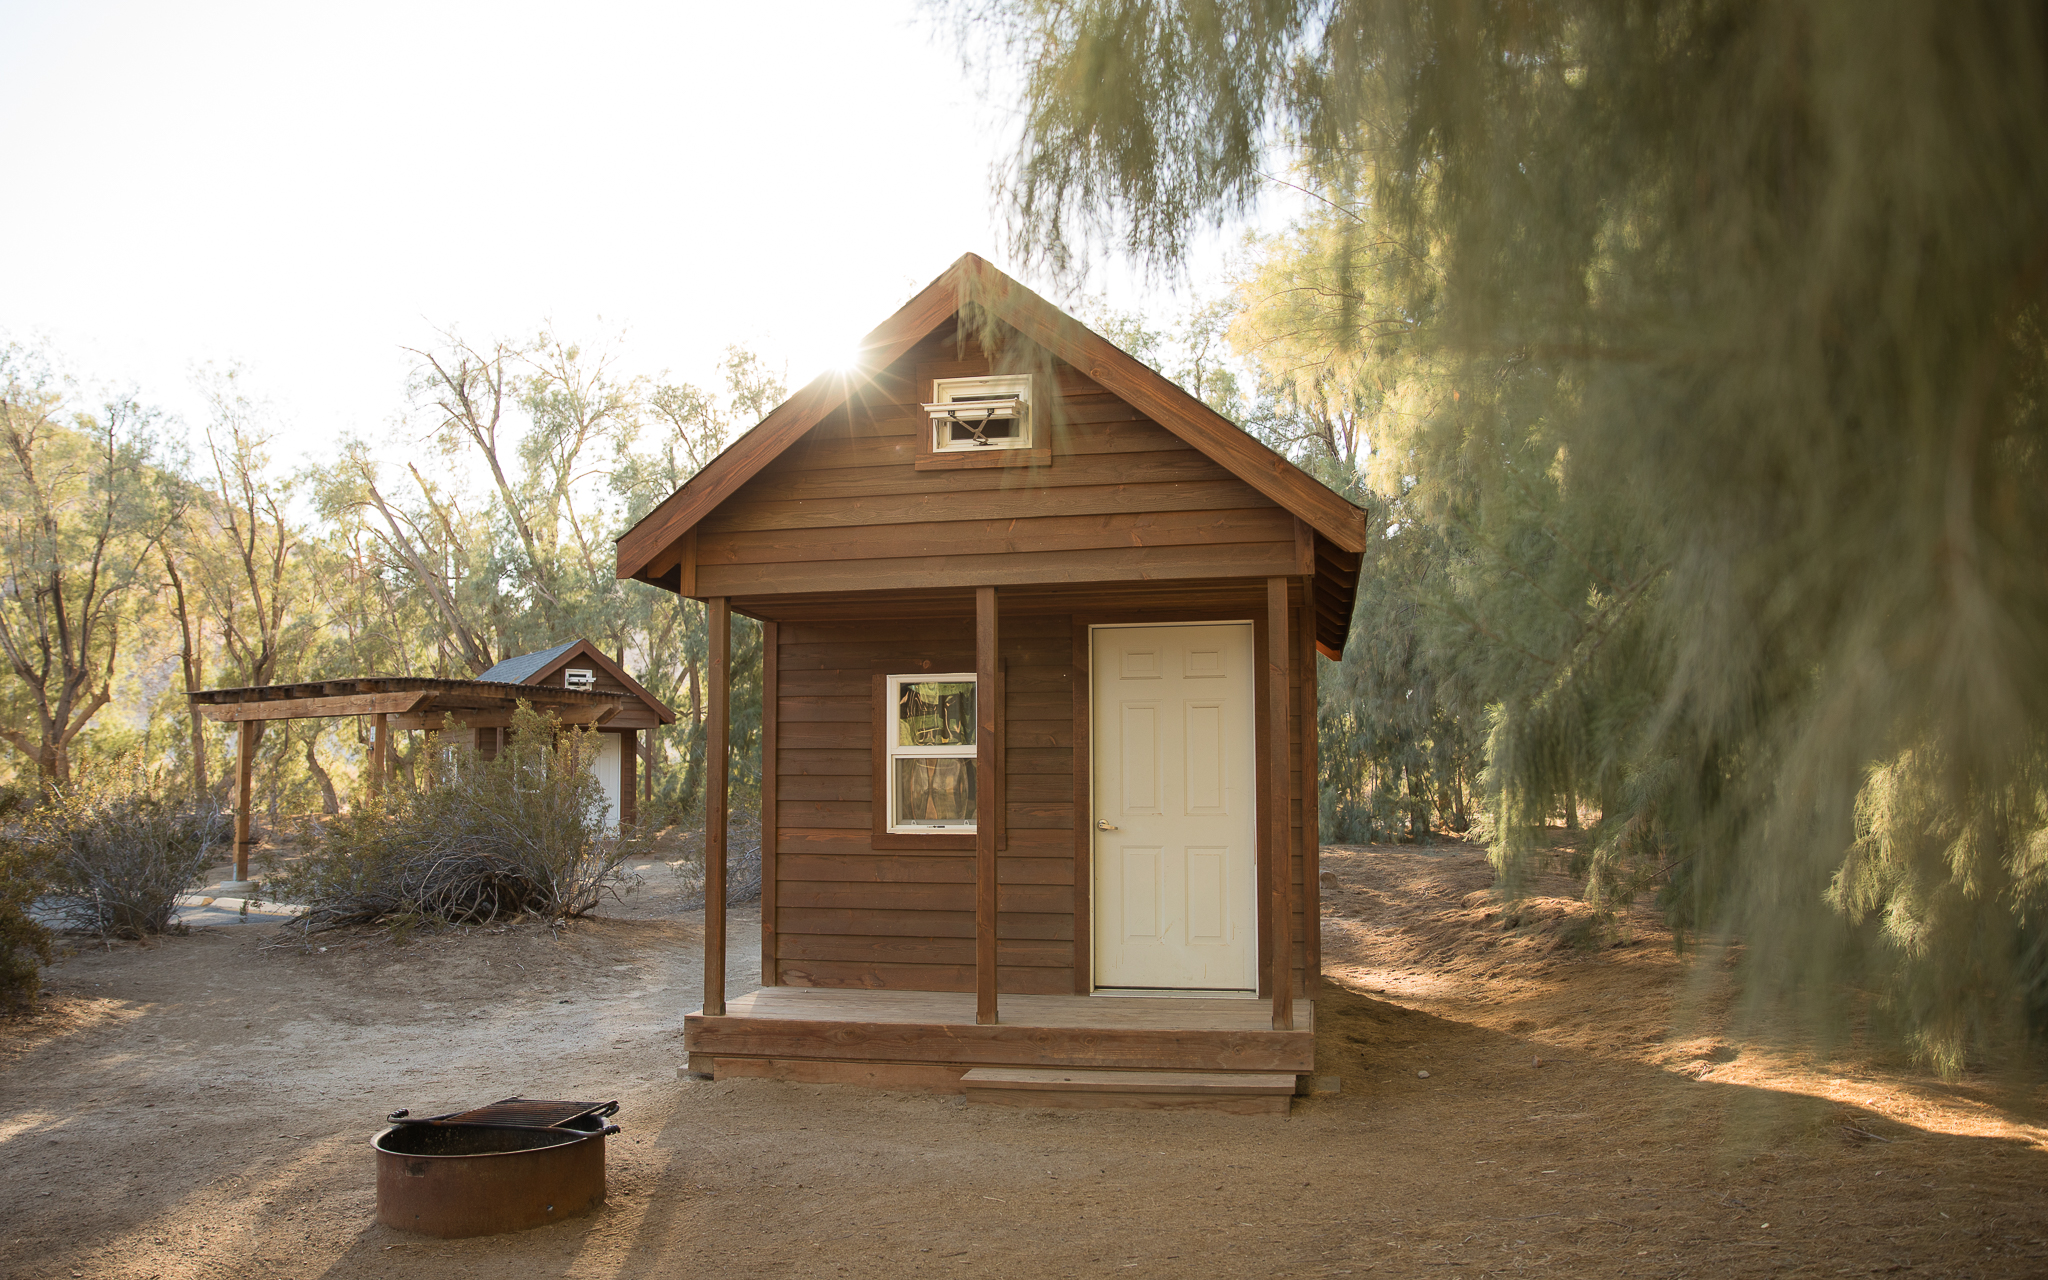 A cabin surrounded by trees at Tamarisk Grove Campground in Anza-Borrego Desert State Park